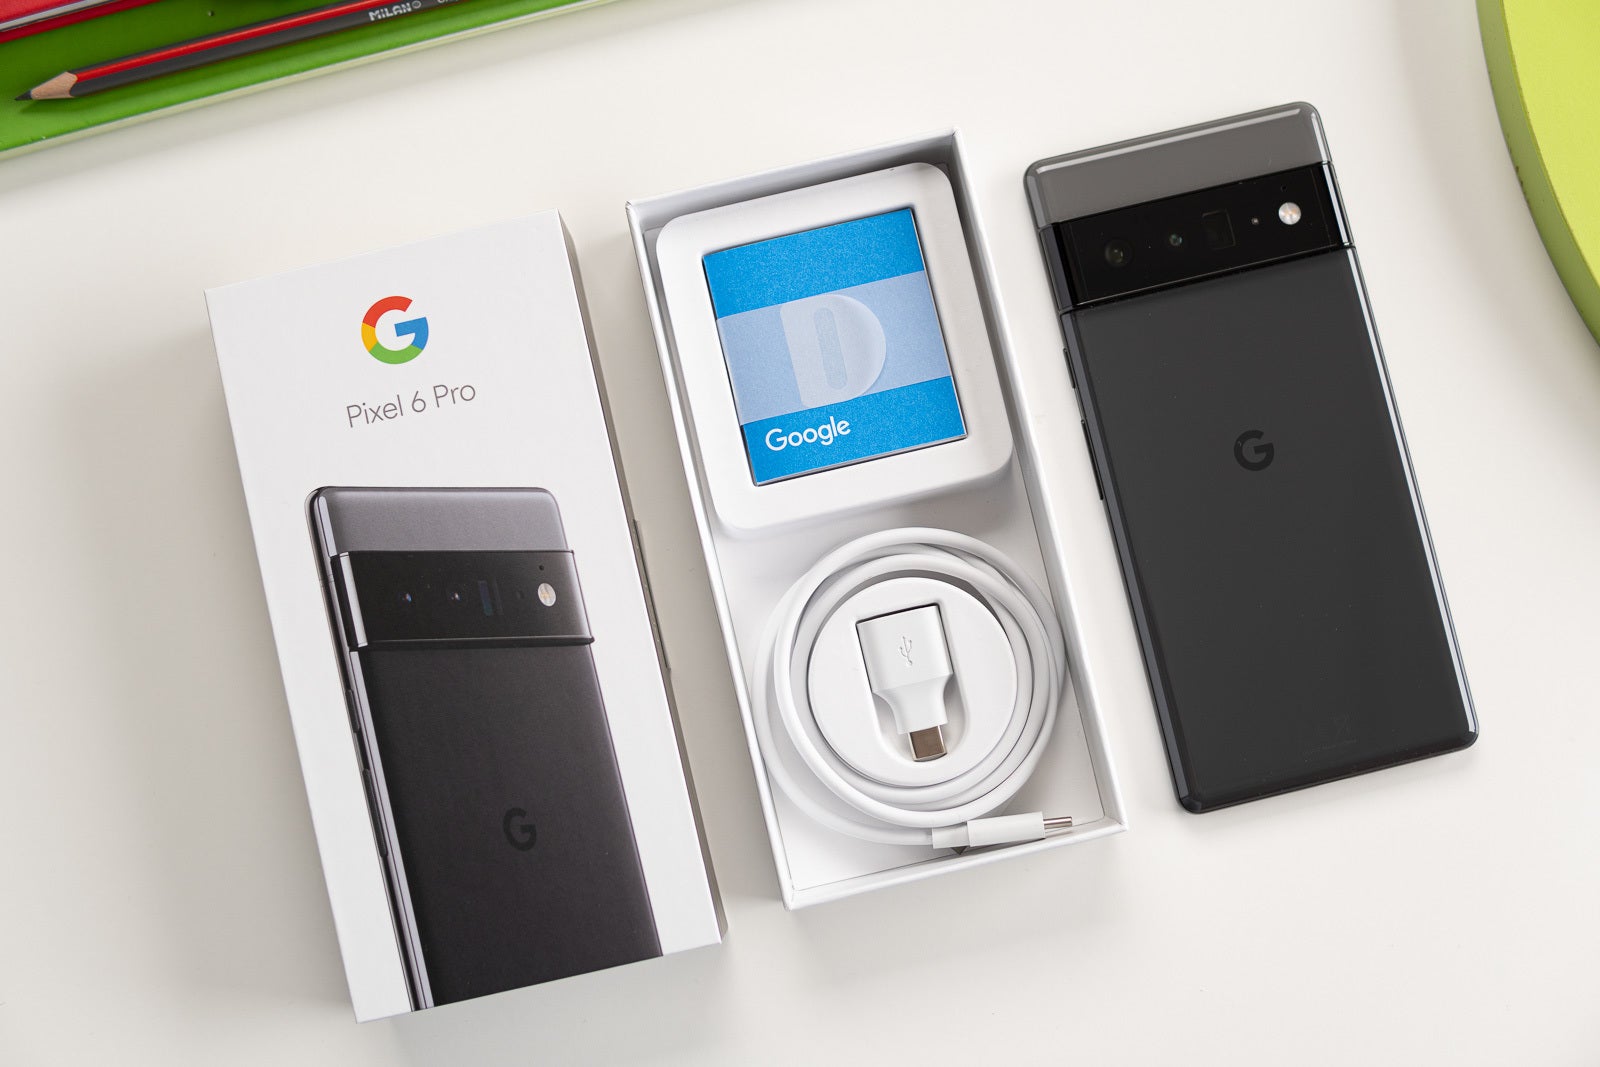 The 30W charger Google has introduced alongside the Pixel 6 duo isn't being used to its full potential - Google may have misled consumers about Pixel 6 charging speed